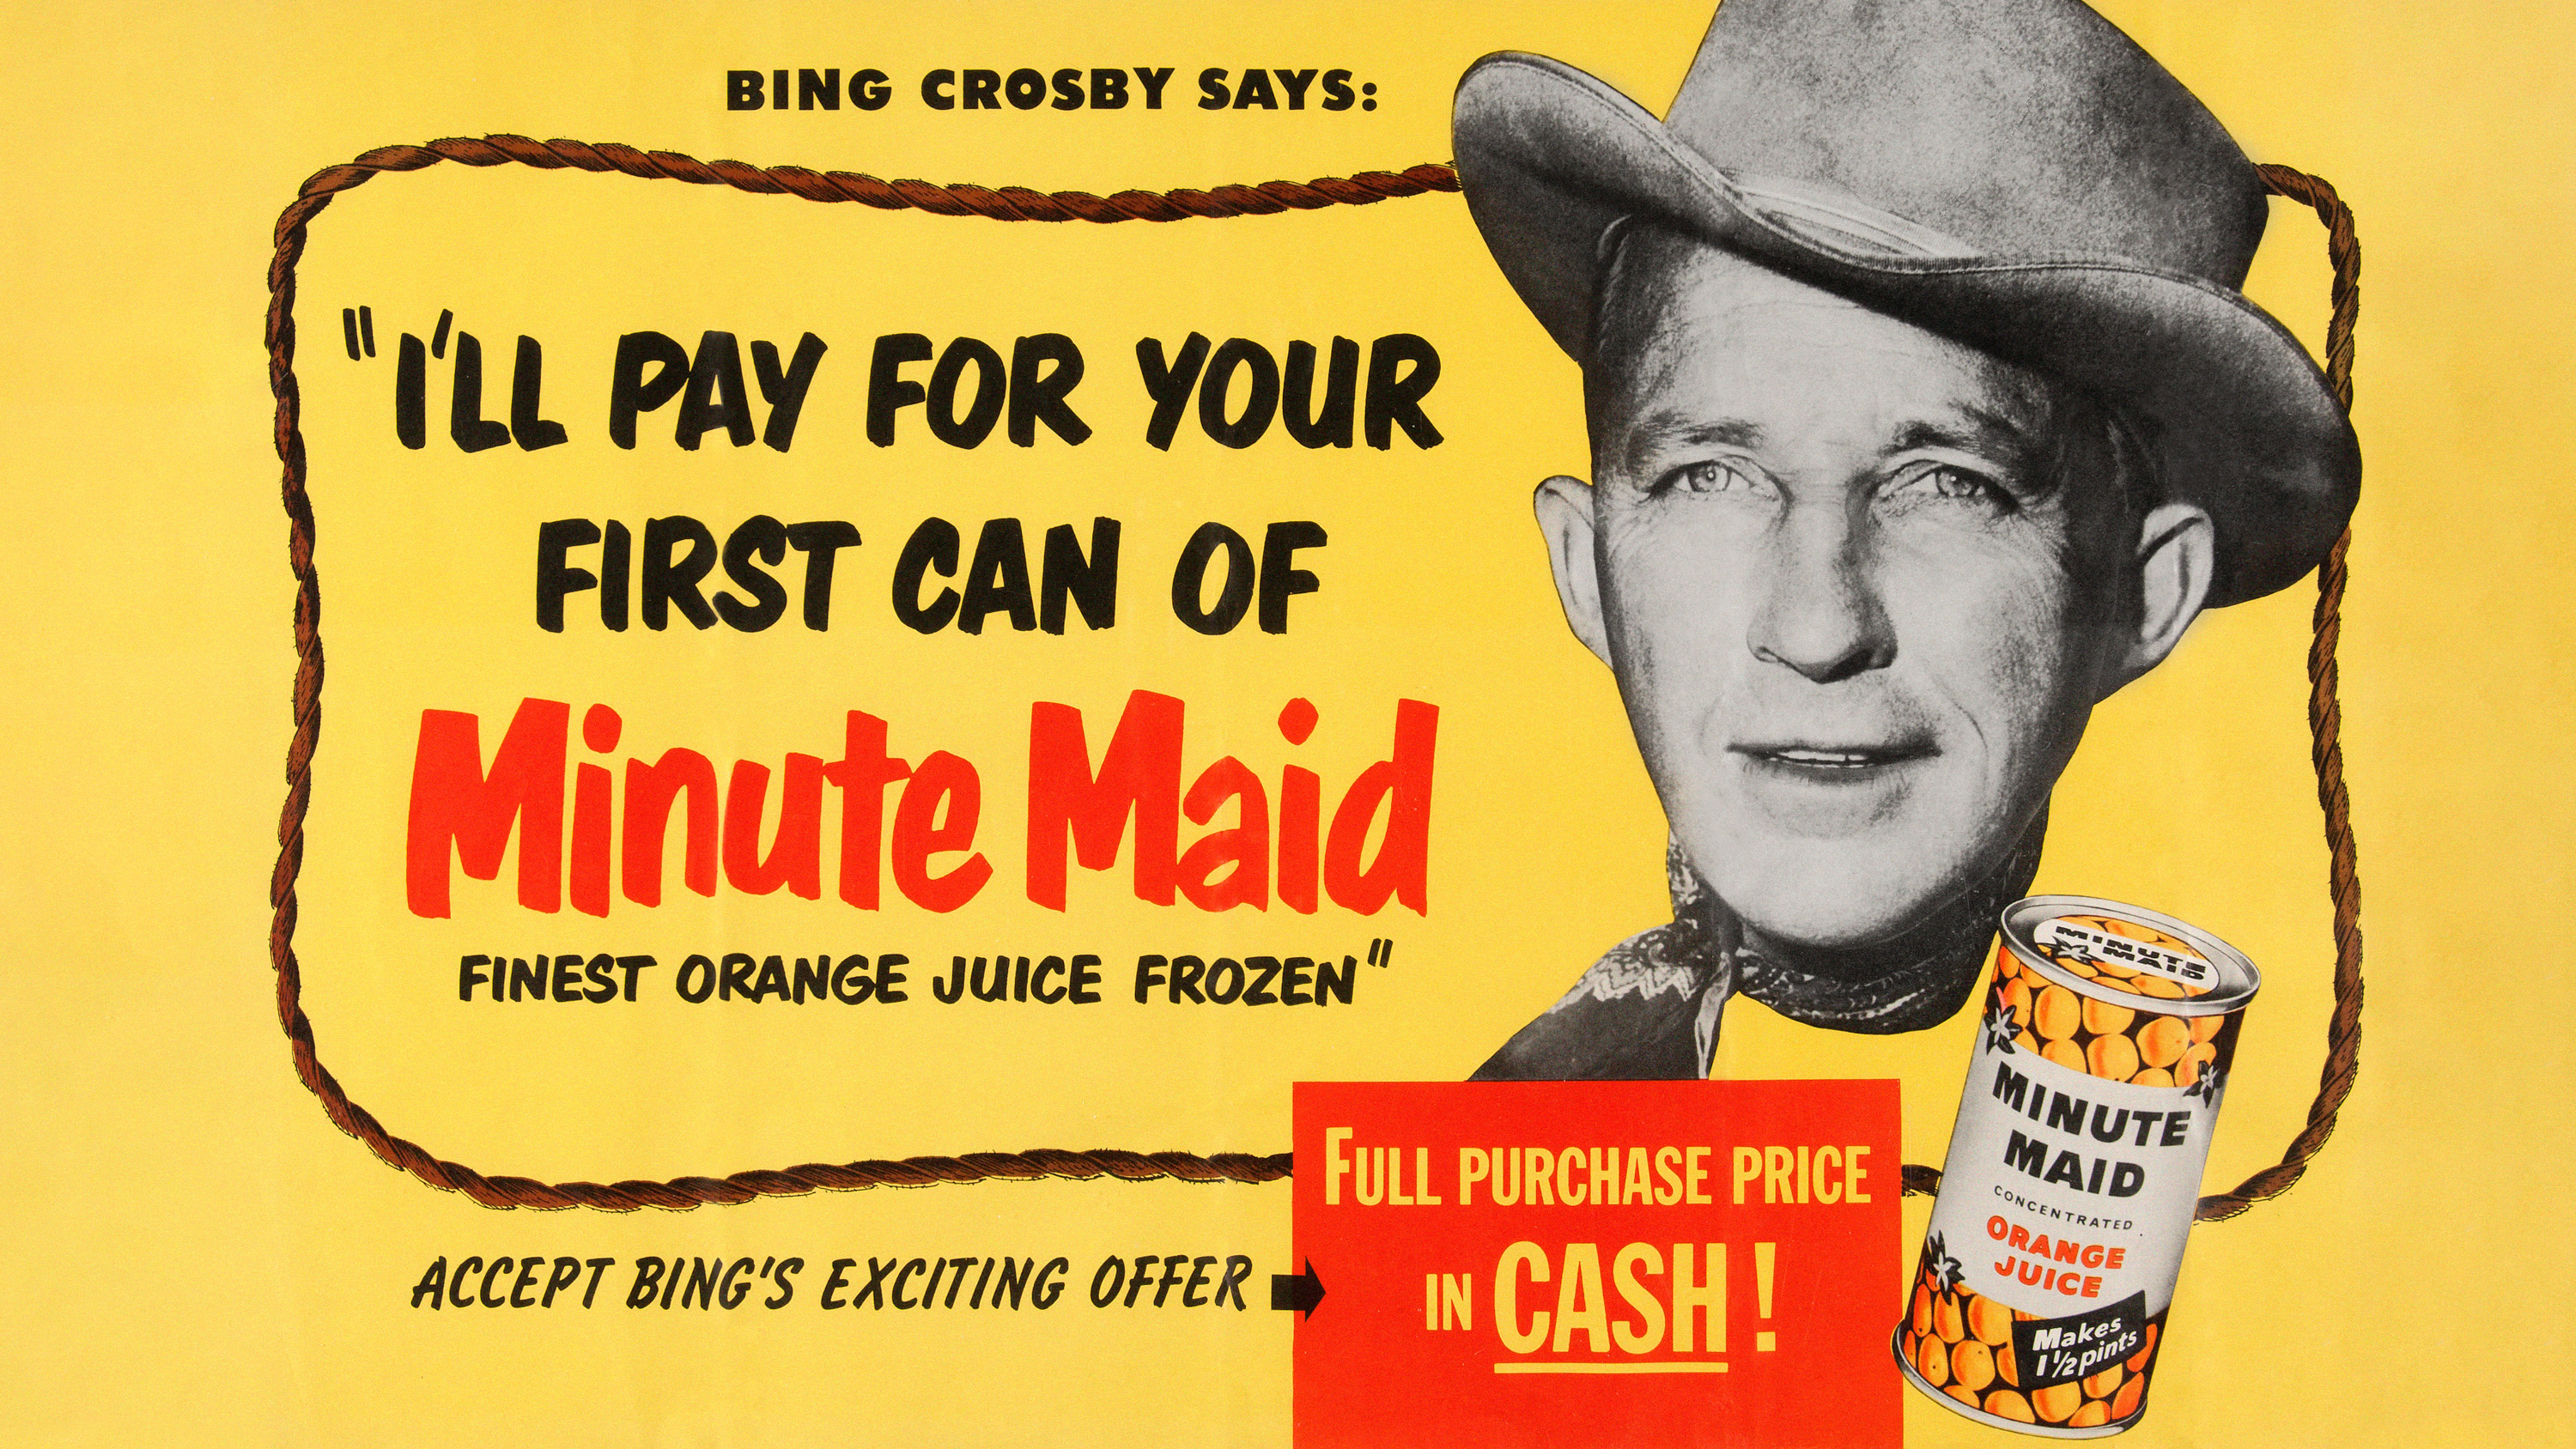 1950s advertisement with head of Bing Crosby in a cowboy hat with text &#039;I&#039;ll Pay For Your First Can Of Minute Maid - Finest Orange Juice Frozen&#039;.&quot;